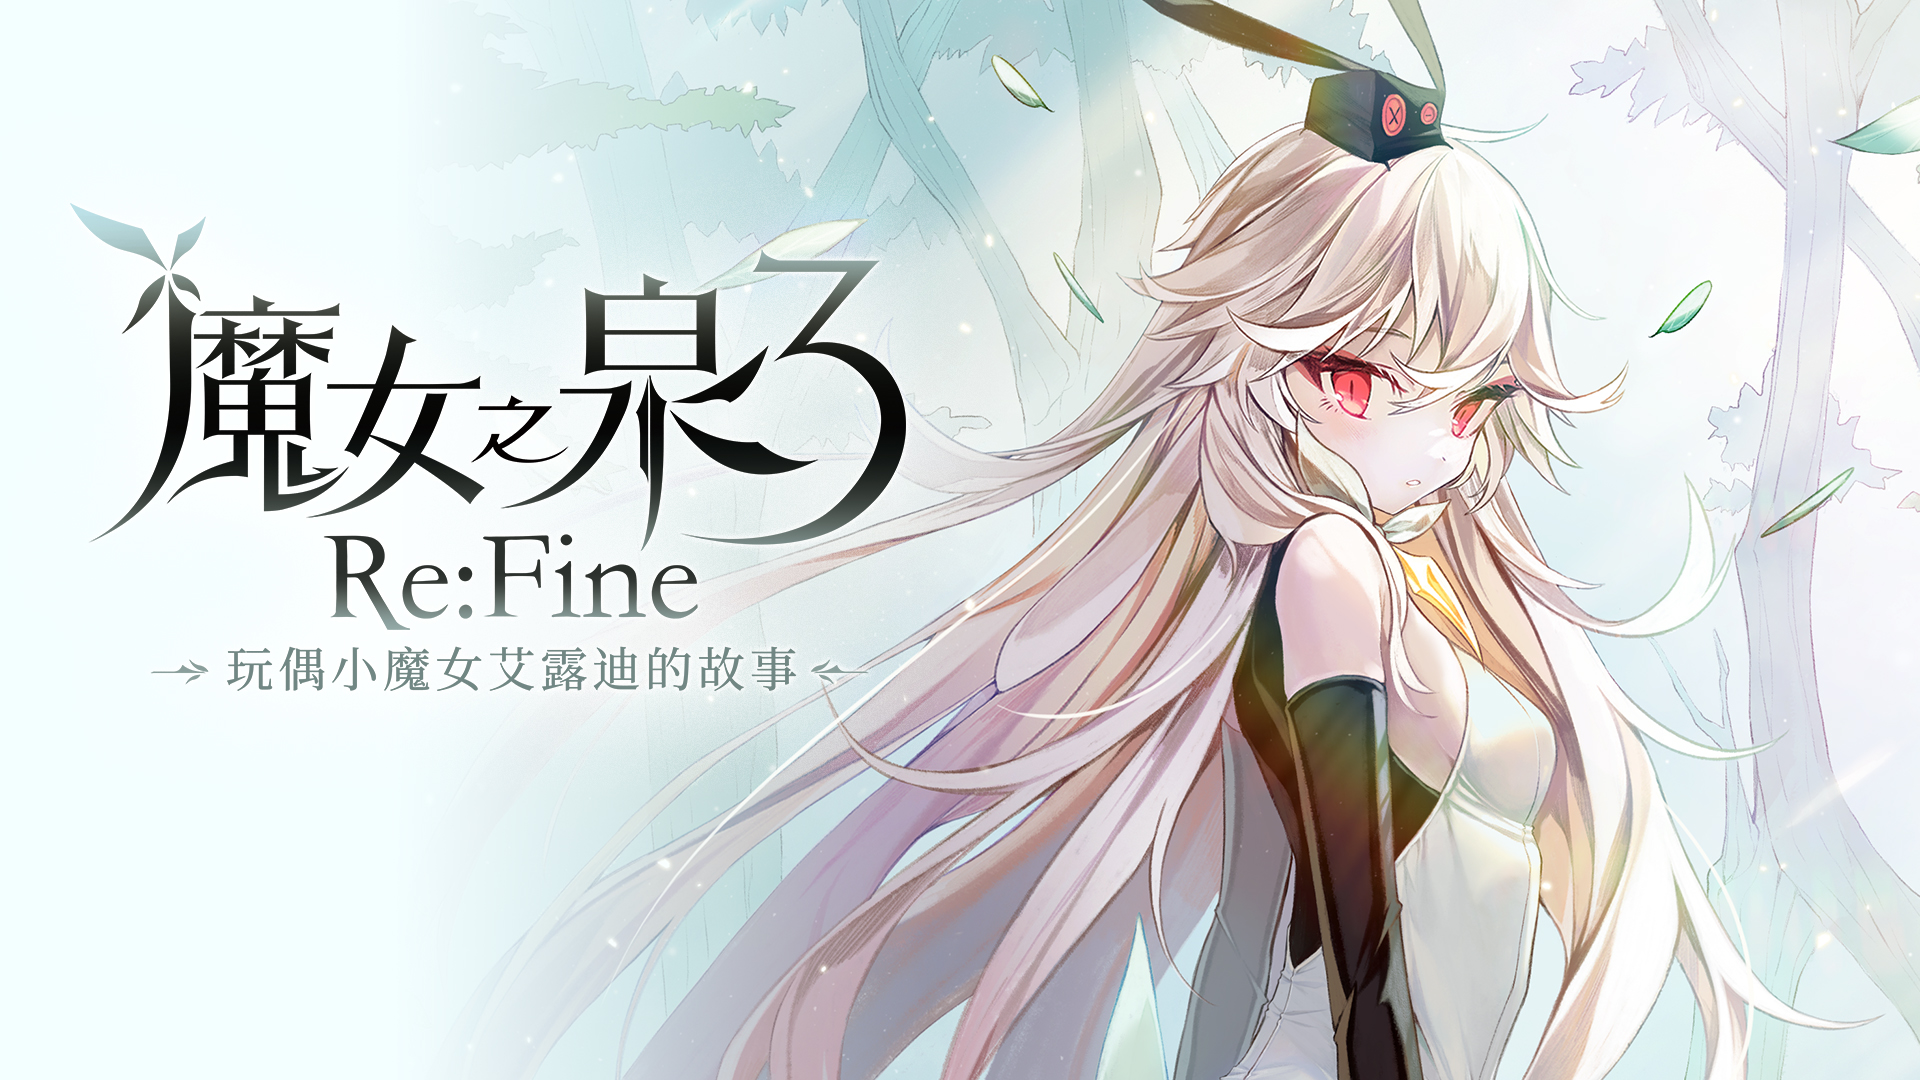 Witch Spring 3 Re:Fine